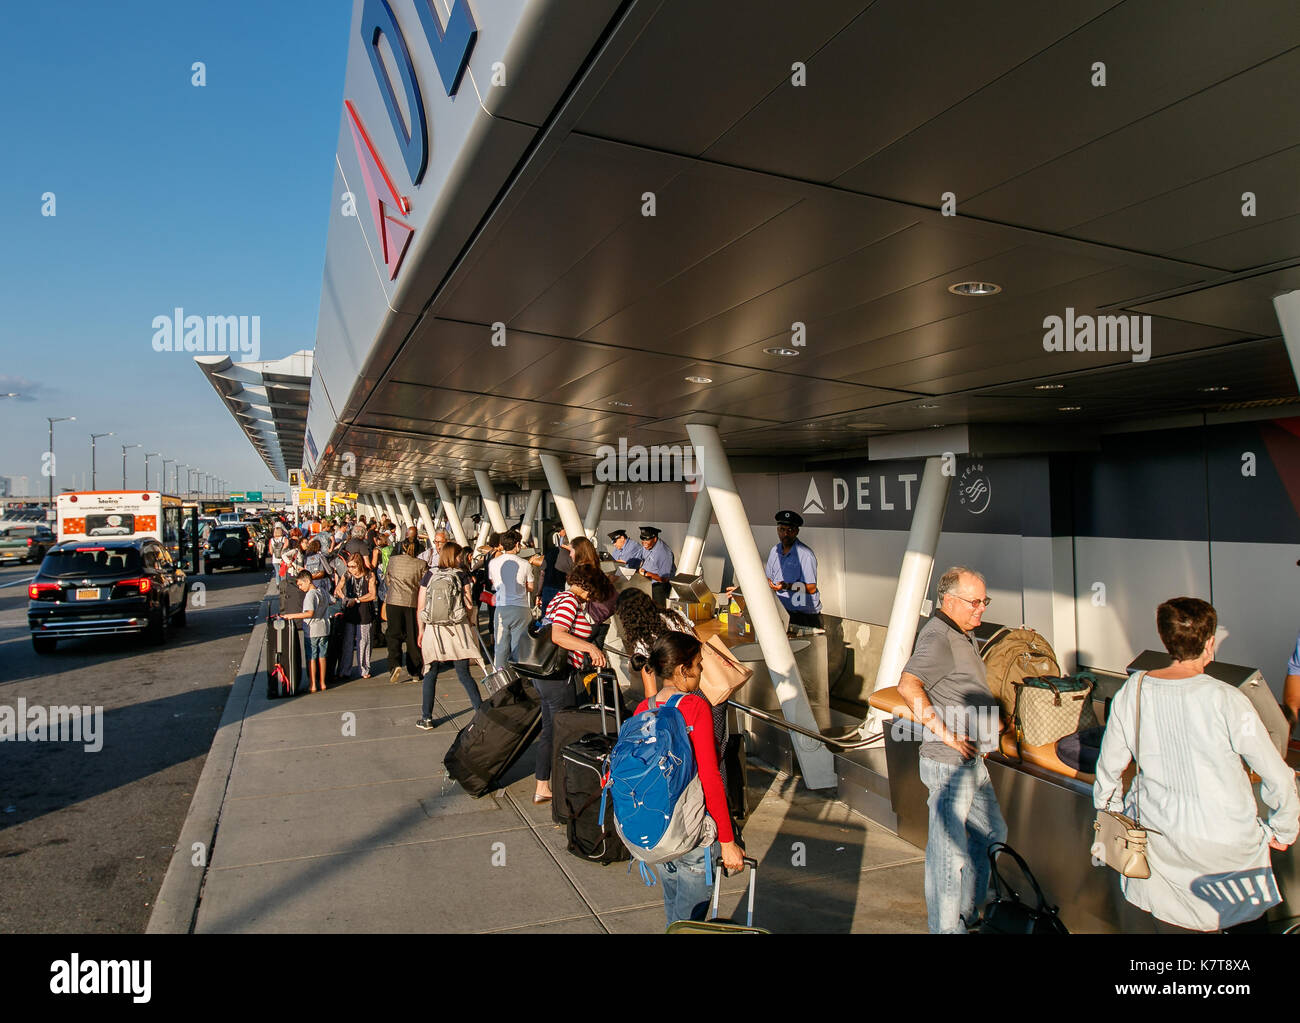 People are going curbside check-in for Delta Airline flights at JFK airport. Stock Photo